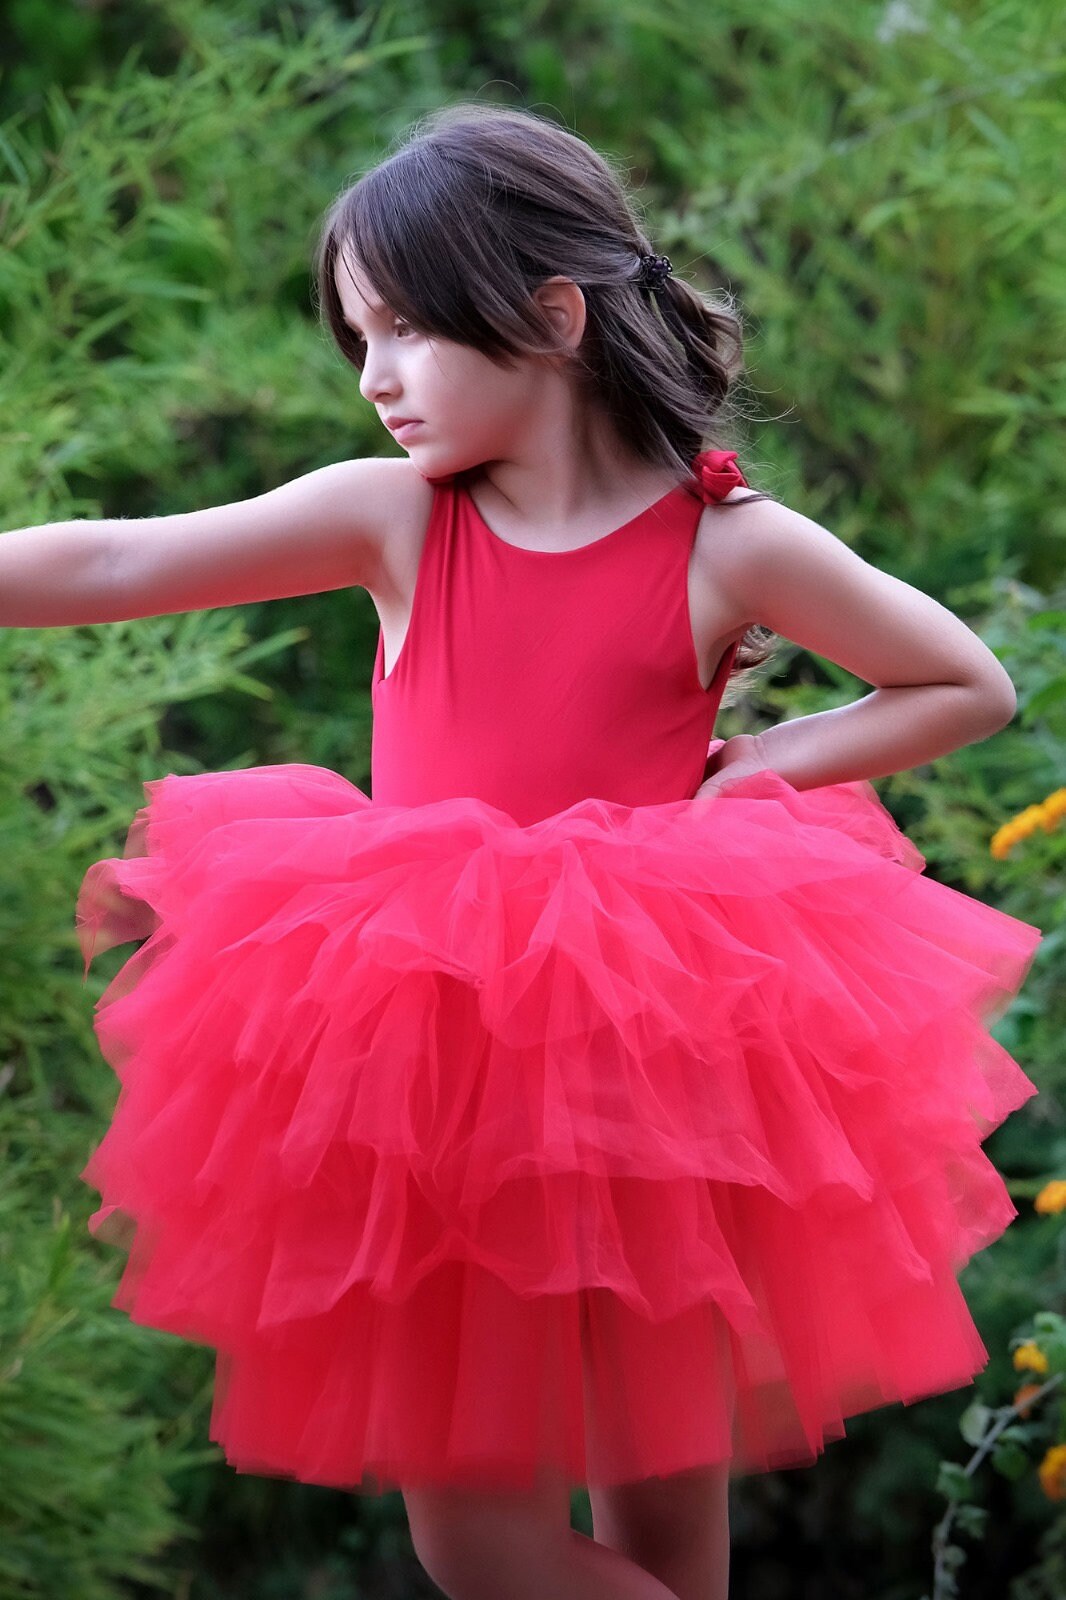 a little girl in a red dress standing in a field